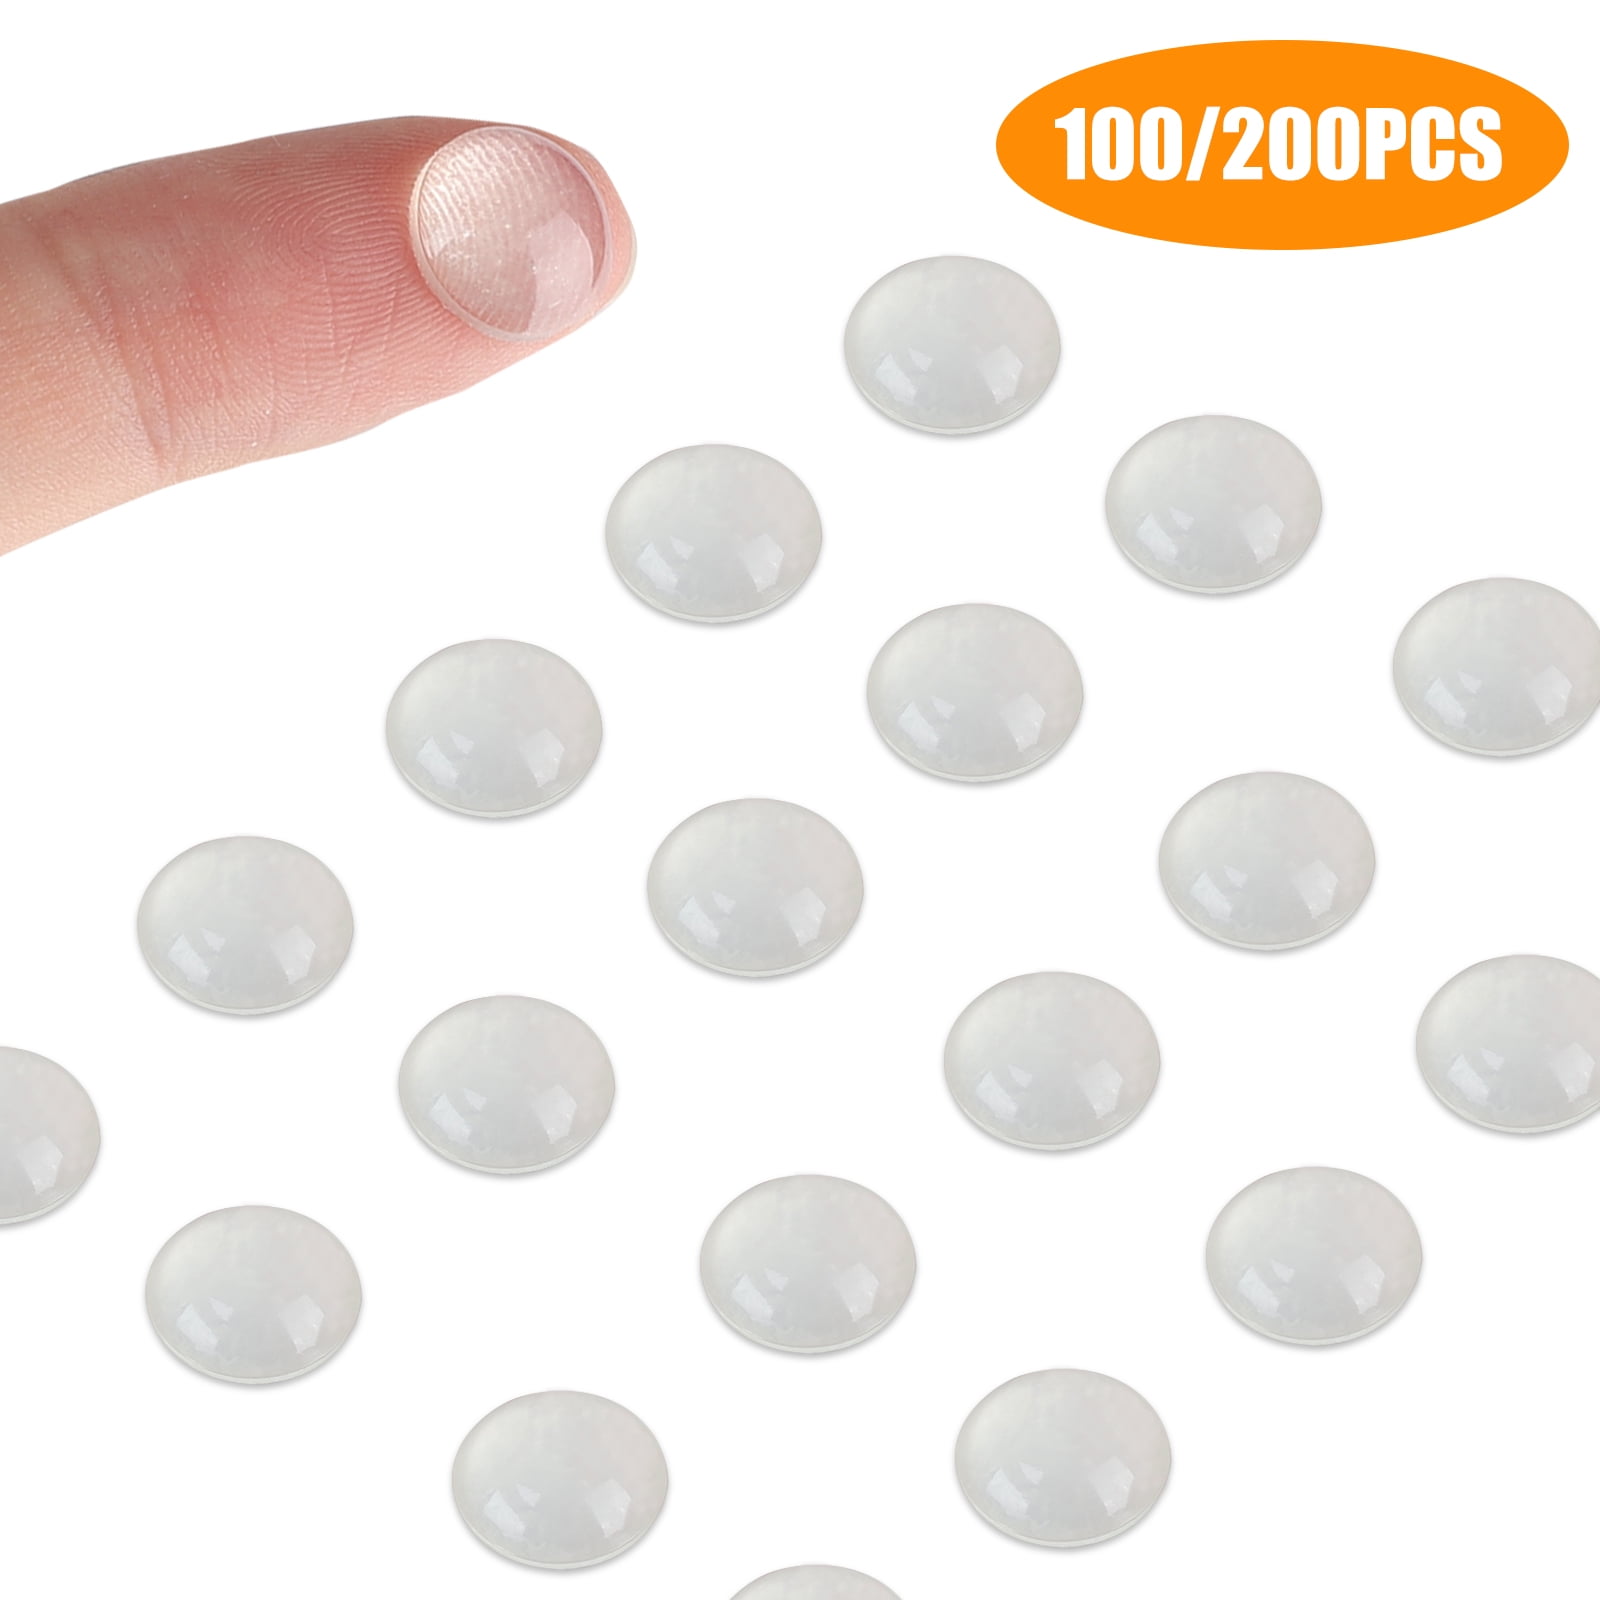 100 Pcs Round Self Adhesive Bumpers Clear Pads Furniture Door Surface Protection 